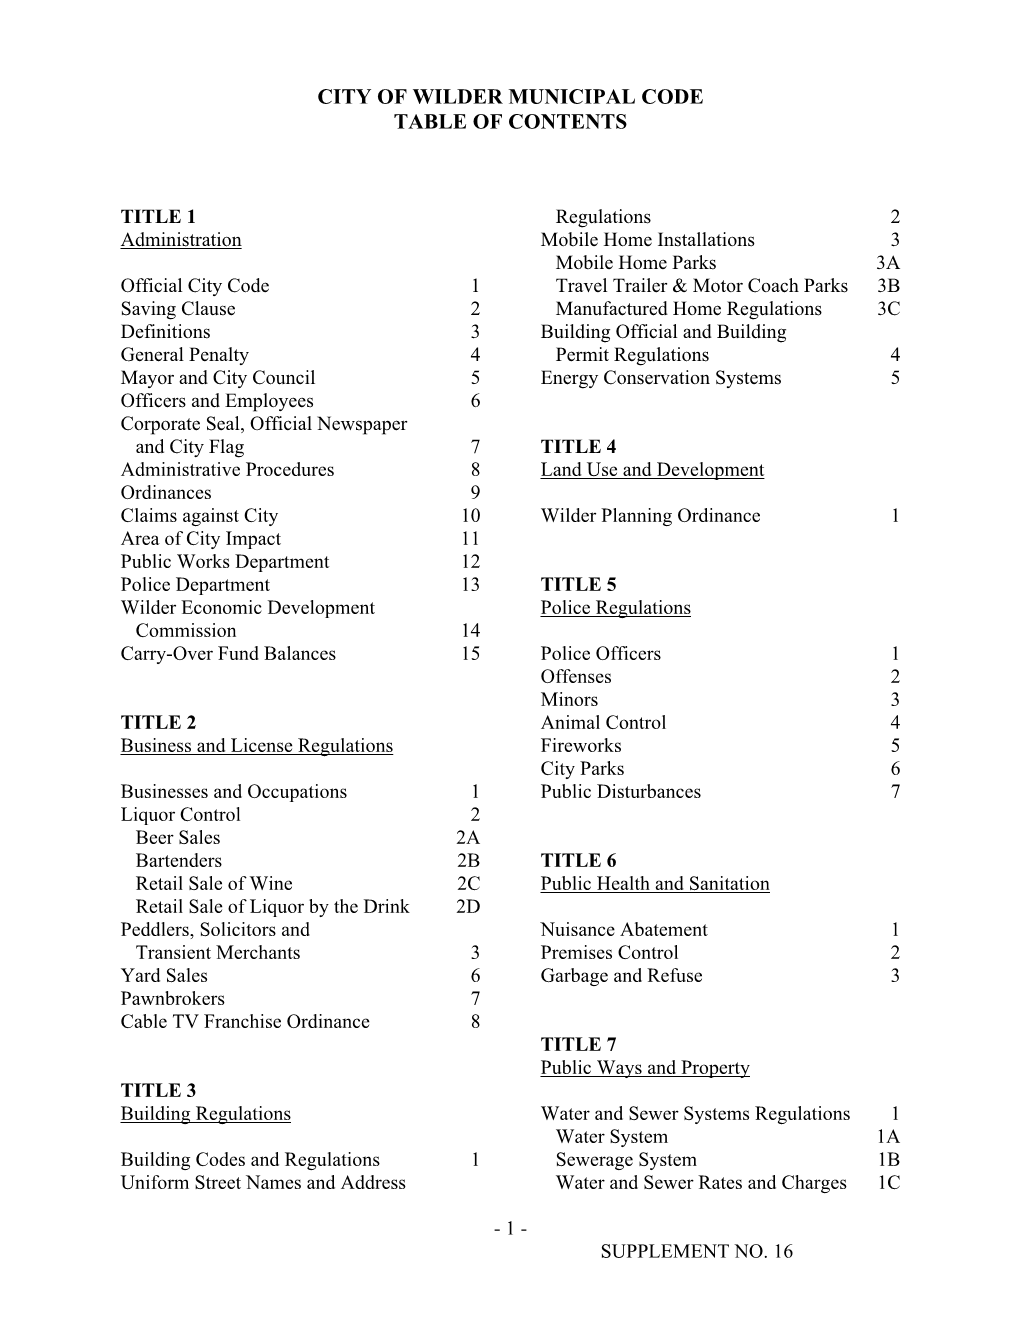 City of Wilder Municipal Code Table of Contents